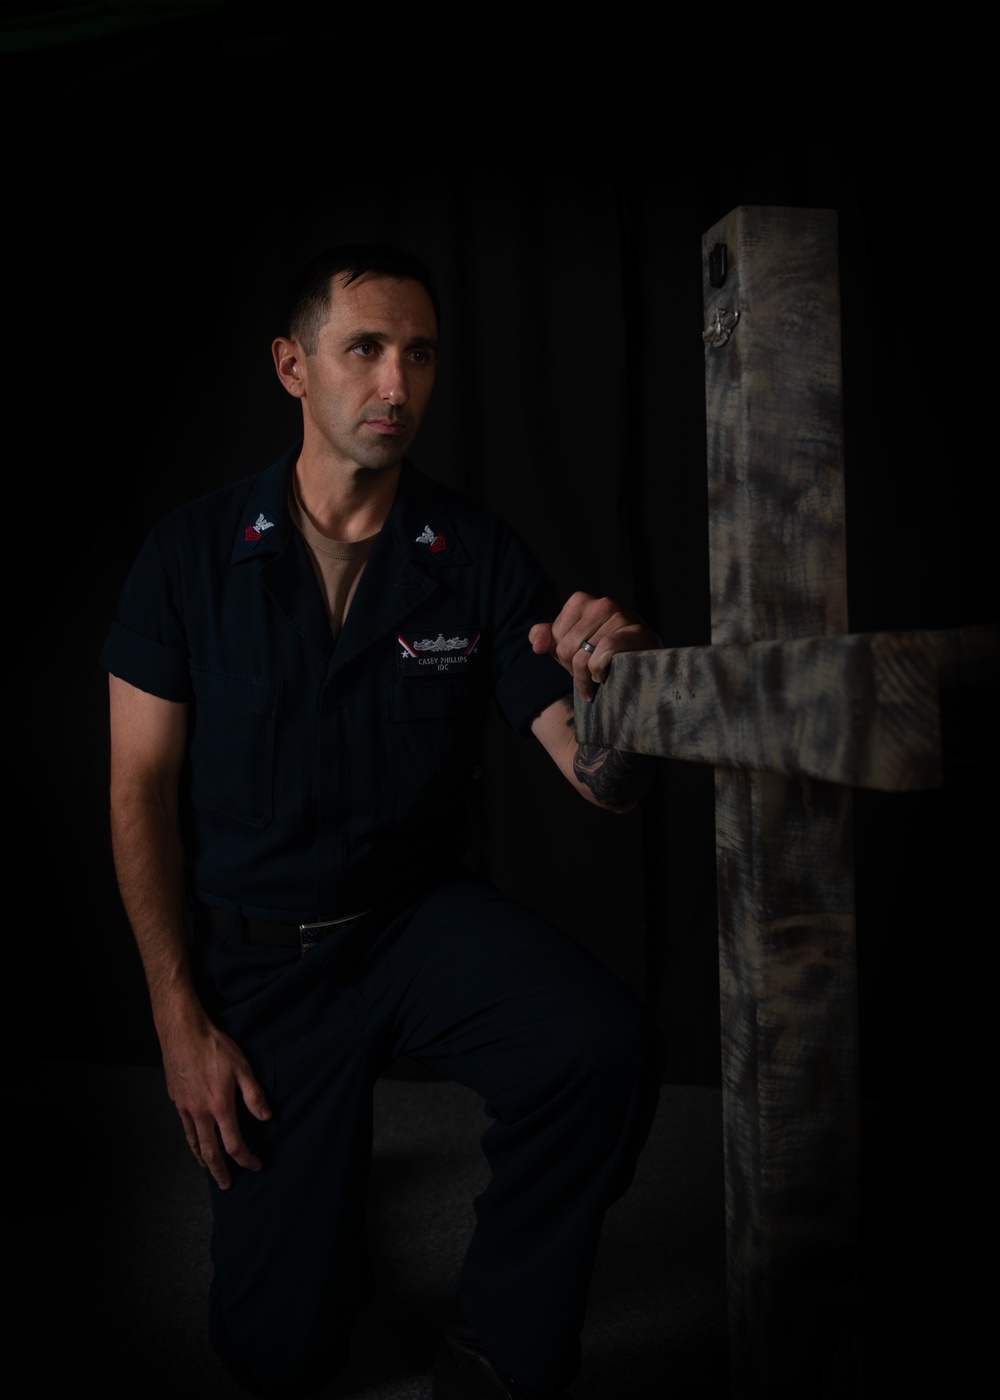 U.S. Navy Hospital Corpsman 1st Class Casey Phillips, from Peoria, Arizona, poses for a portrait